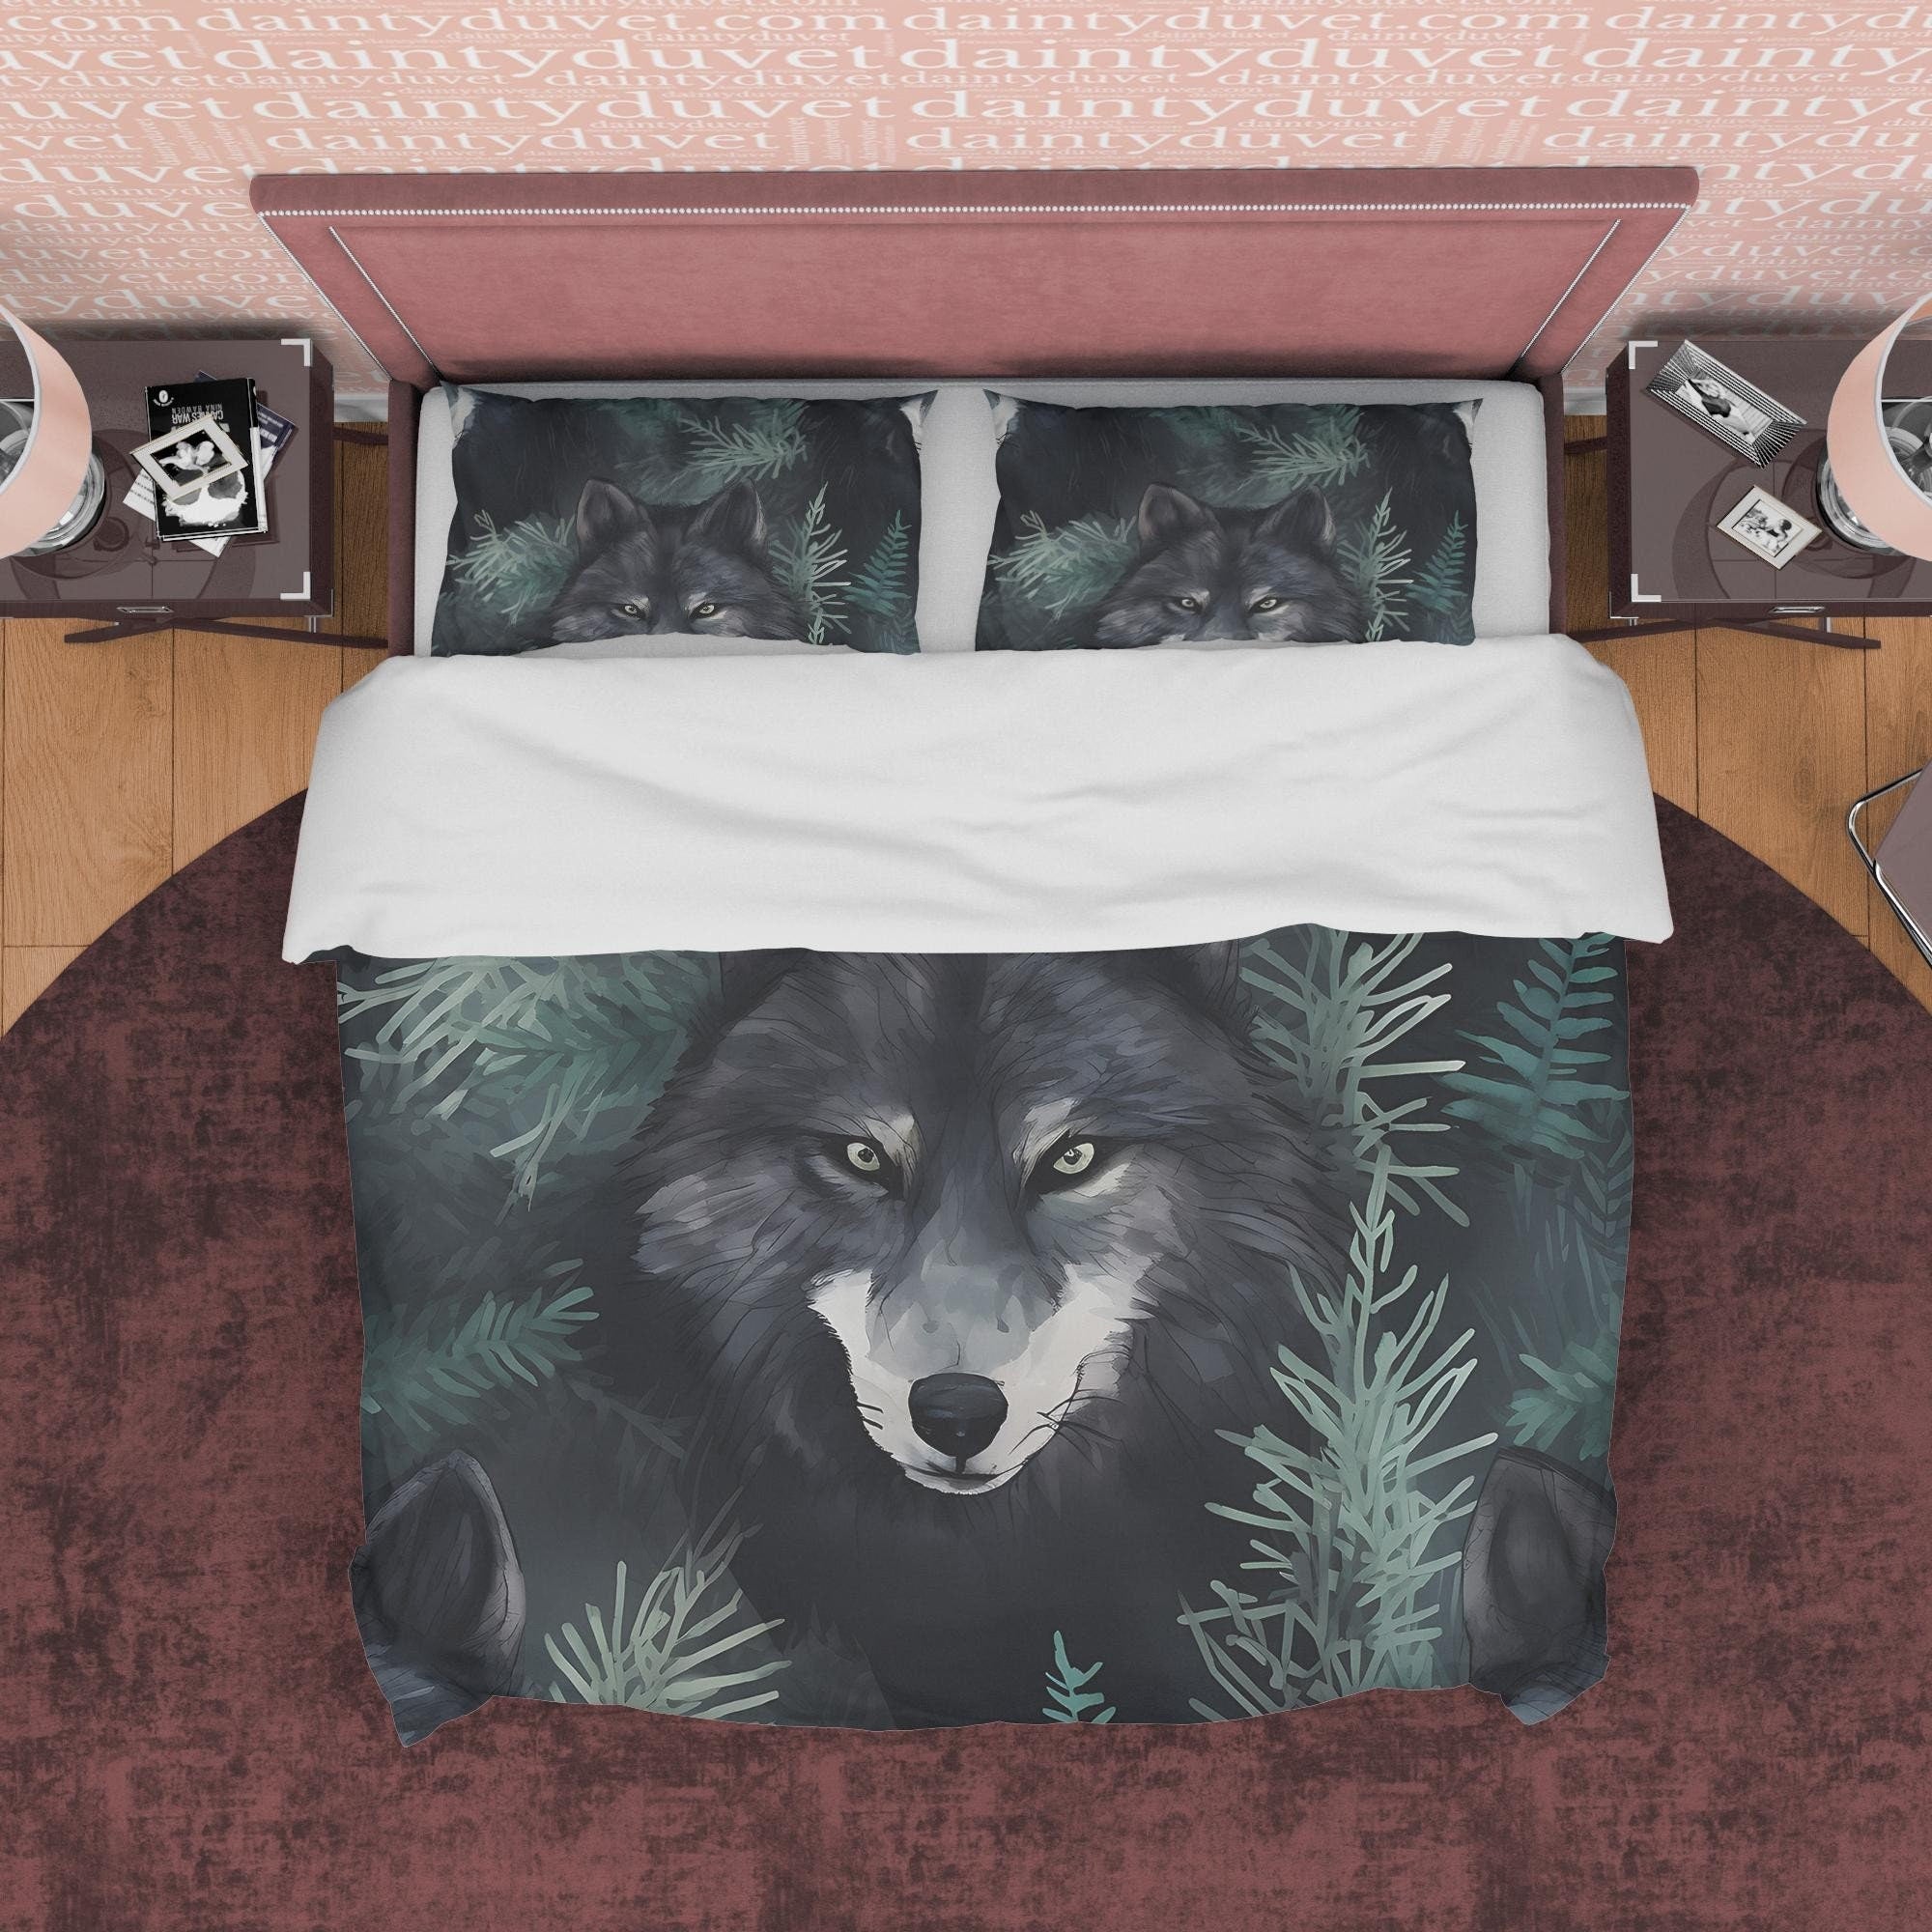 Sneaking Wolf Duvet Cover Set, Halloween Gray Room Decor Aesthetic Zipper Bedding, Fierce Animal Blanket Cover, Scary Forest Bed Cover